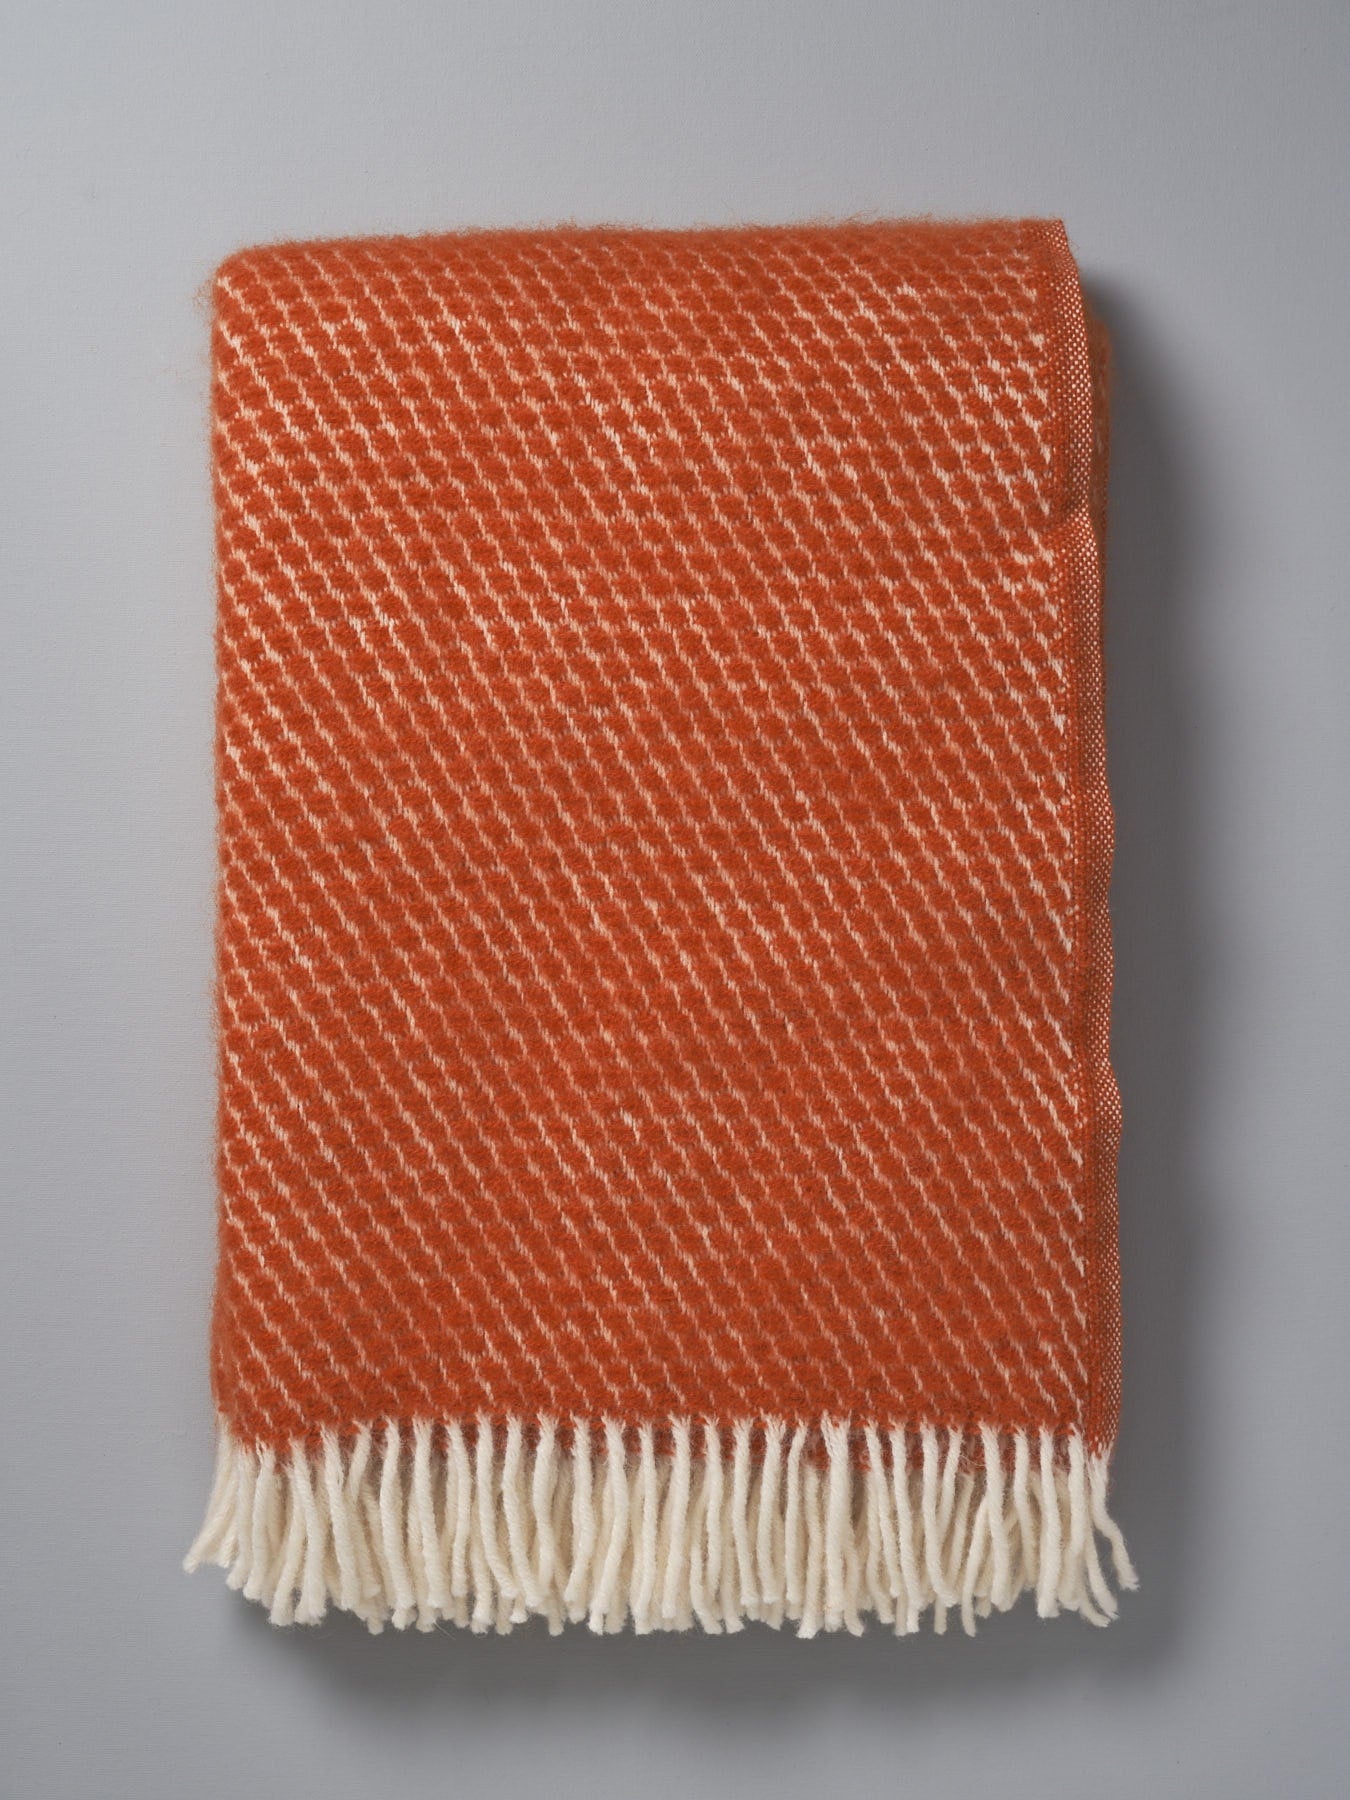 A Honeycomb ECO* Lambswool Throw - Rust by Klippan with white fringes on a grey background.